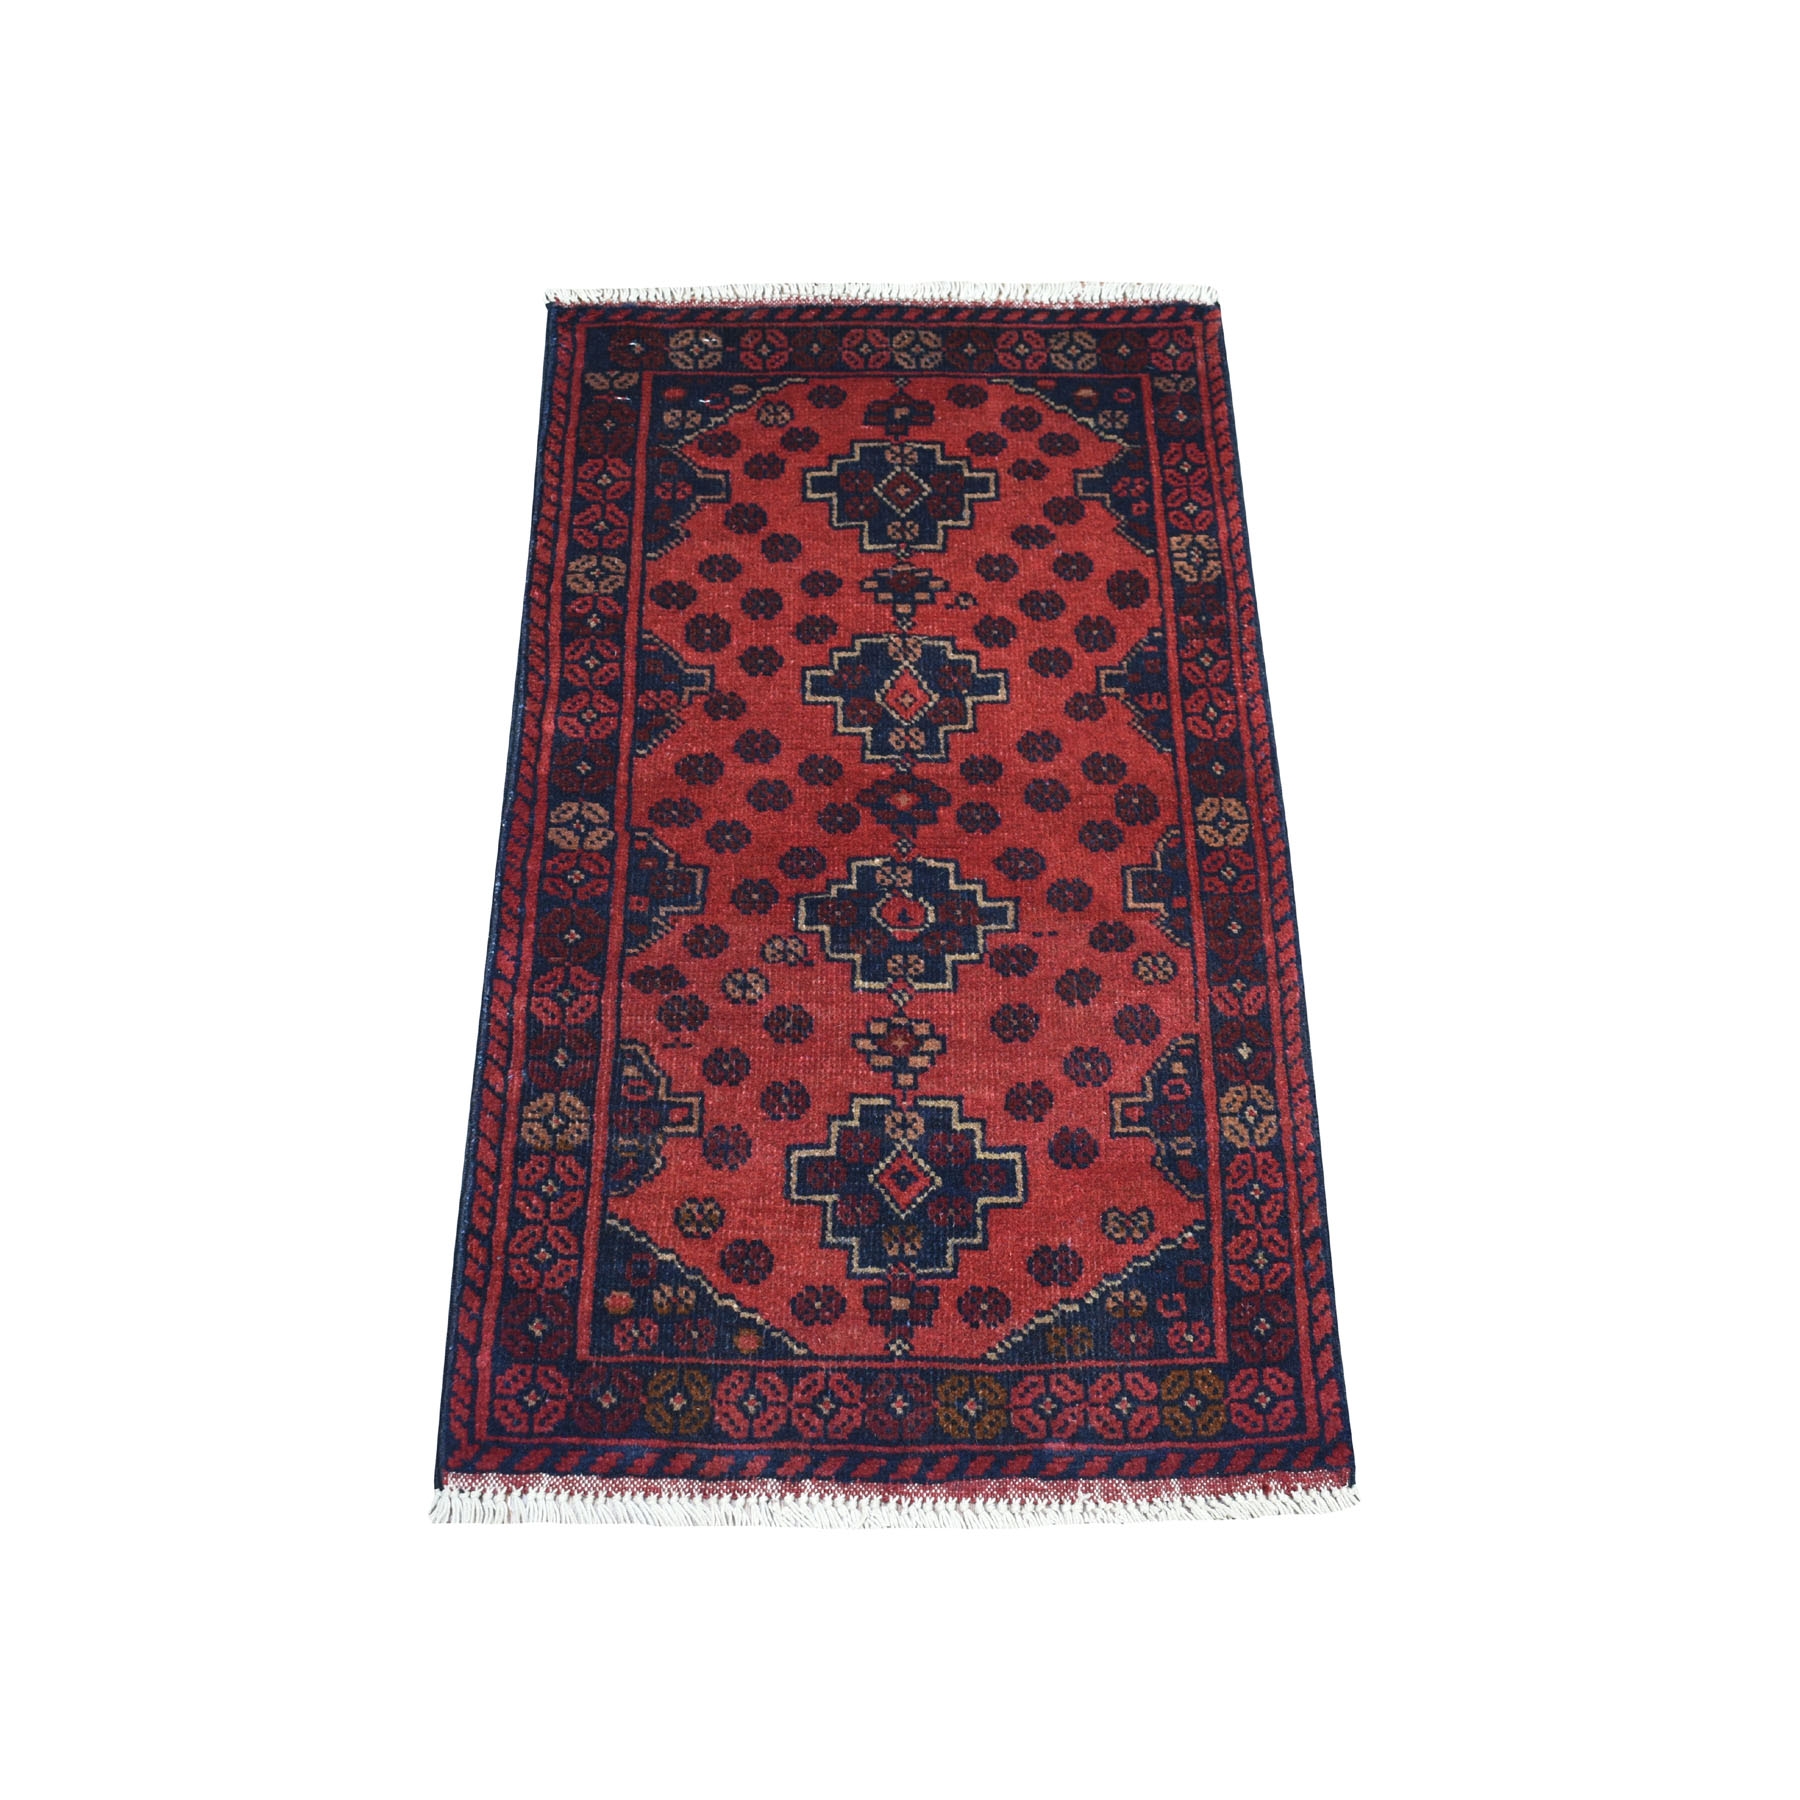 1'8"X3'1" Deep And Saturated Red Tribal Afghan Andkhoy Pure Wool Hand Knotted Oriental Rug moaec7ca